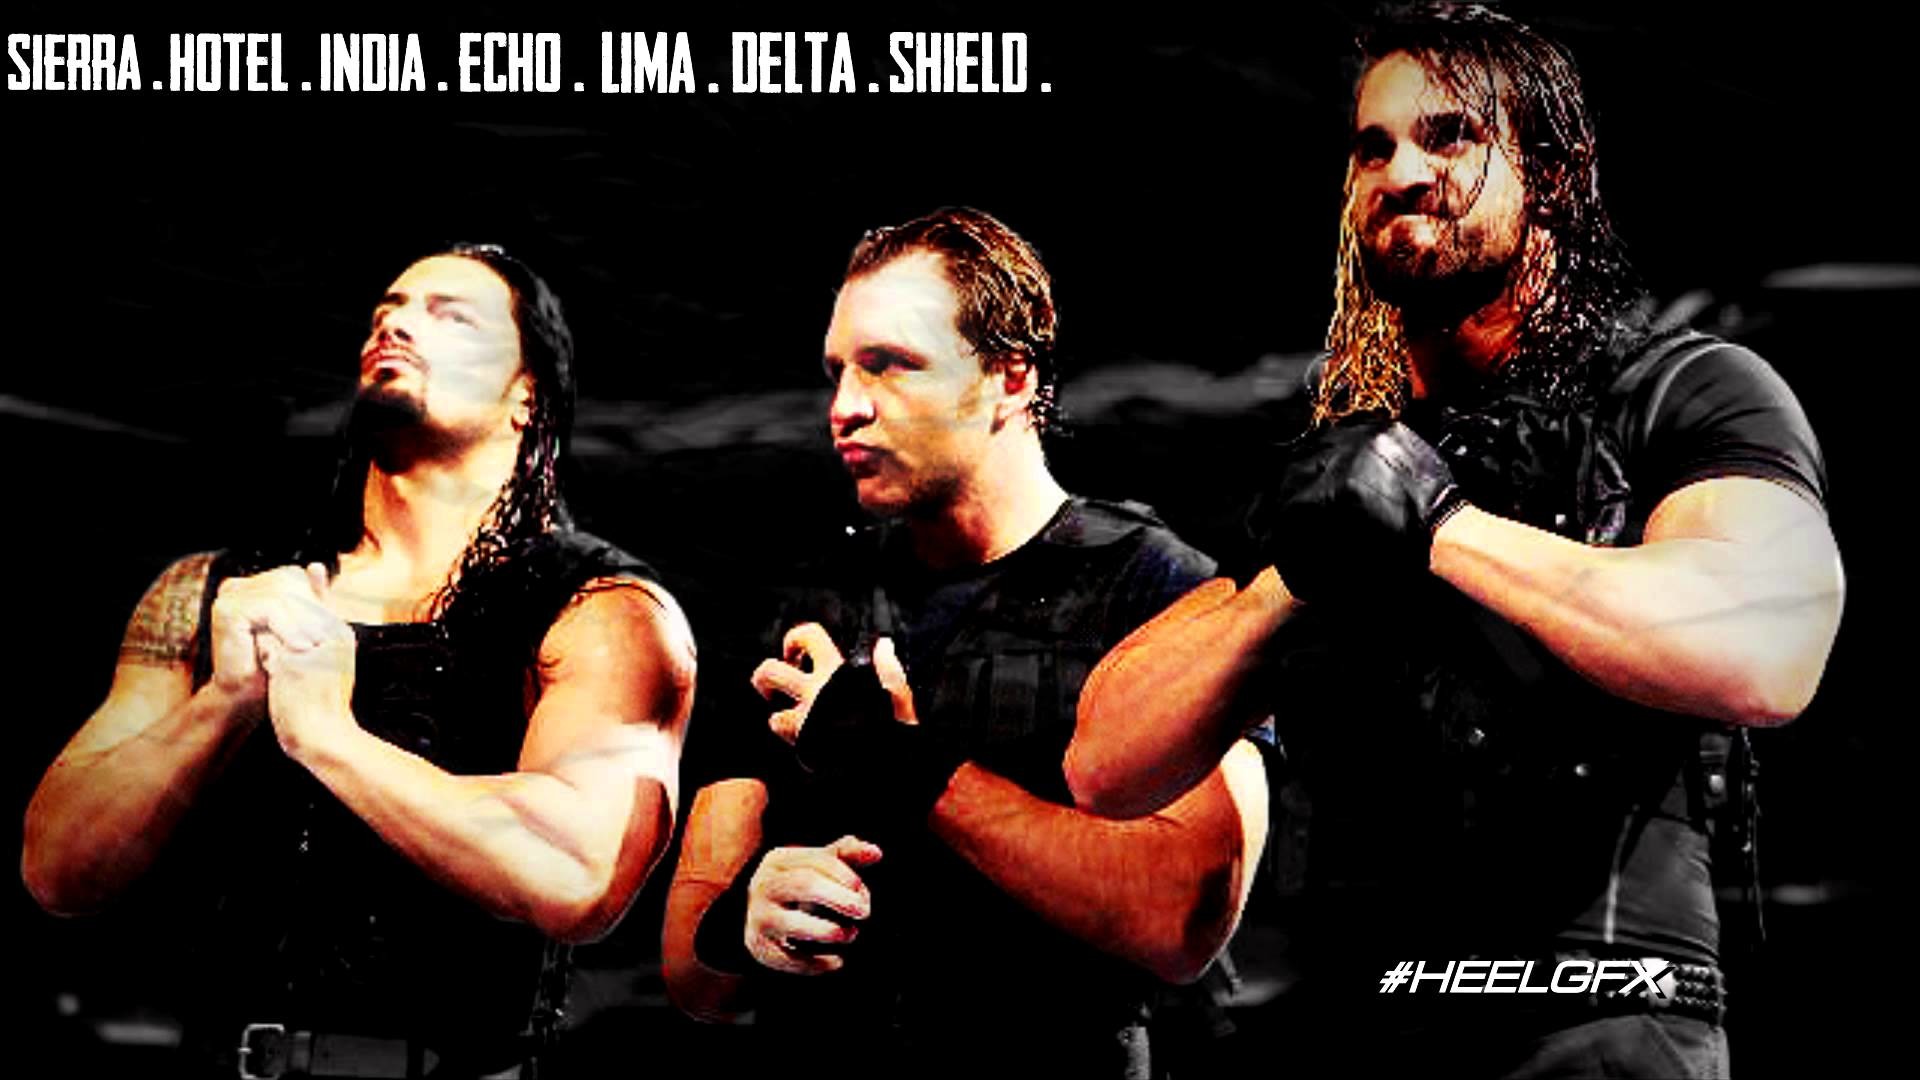 1920x1080 2013: The Shield 1st WWE Theme Song - "Special Op" + Download Link á´´á´° -  YouTube